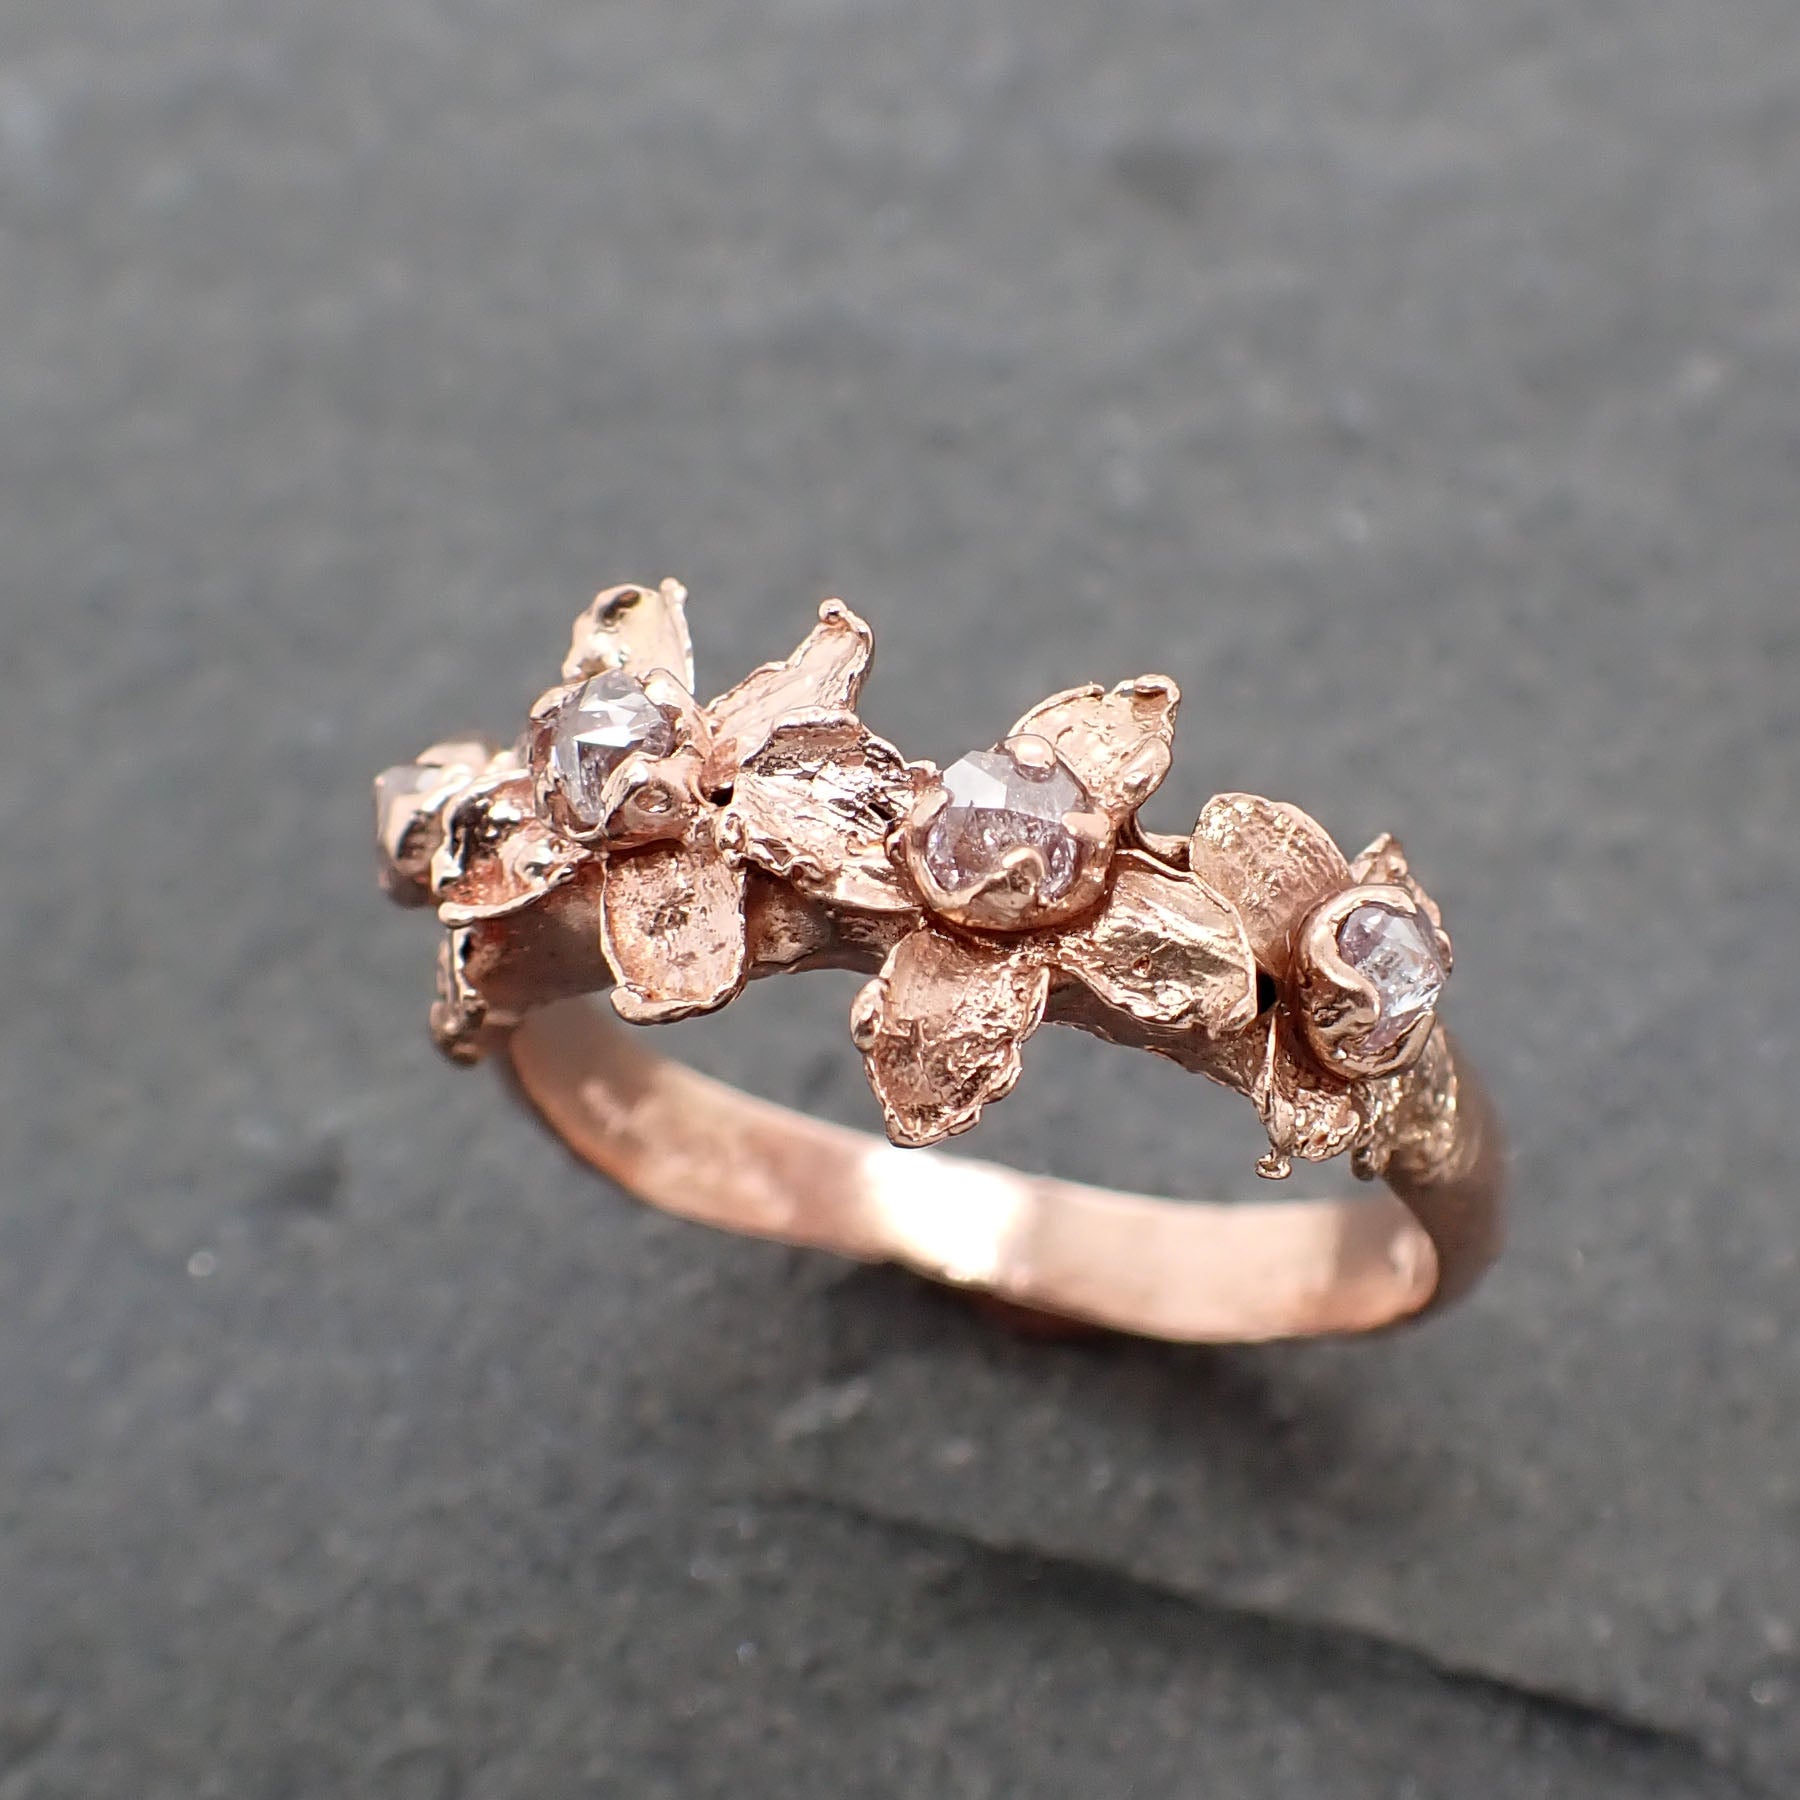 Real Flower and Pink Diamond 14k Rose gold multi stone Enchanted Garden Floral Ring byAngeline 2499